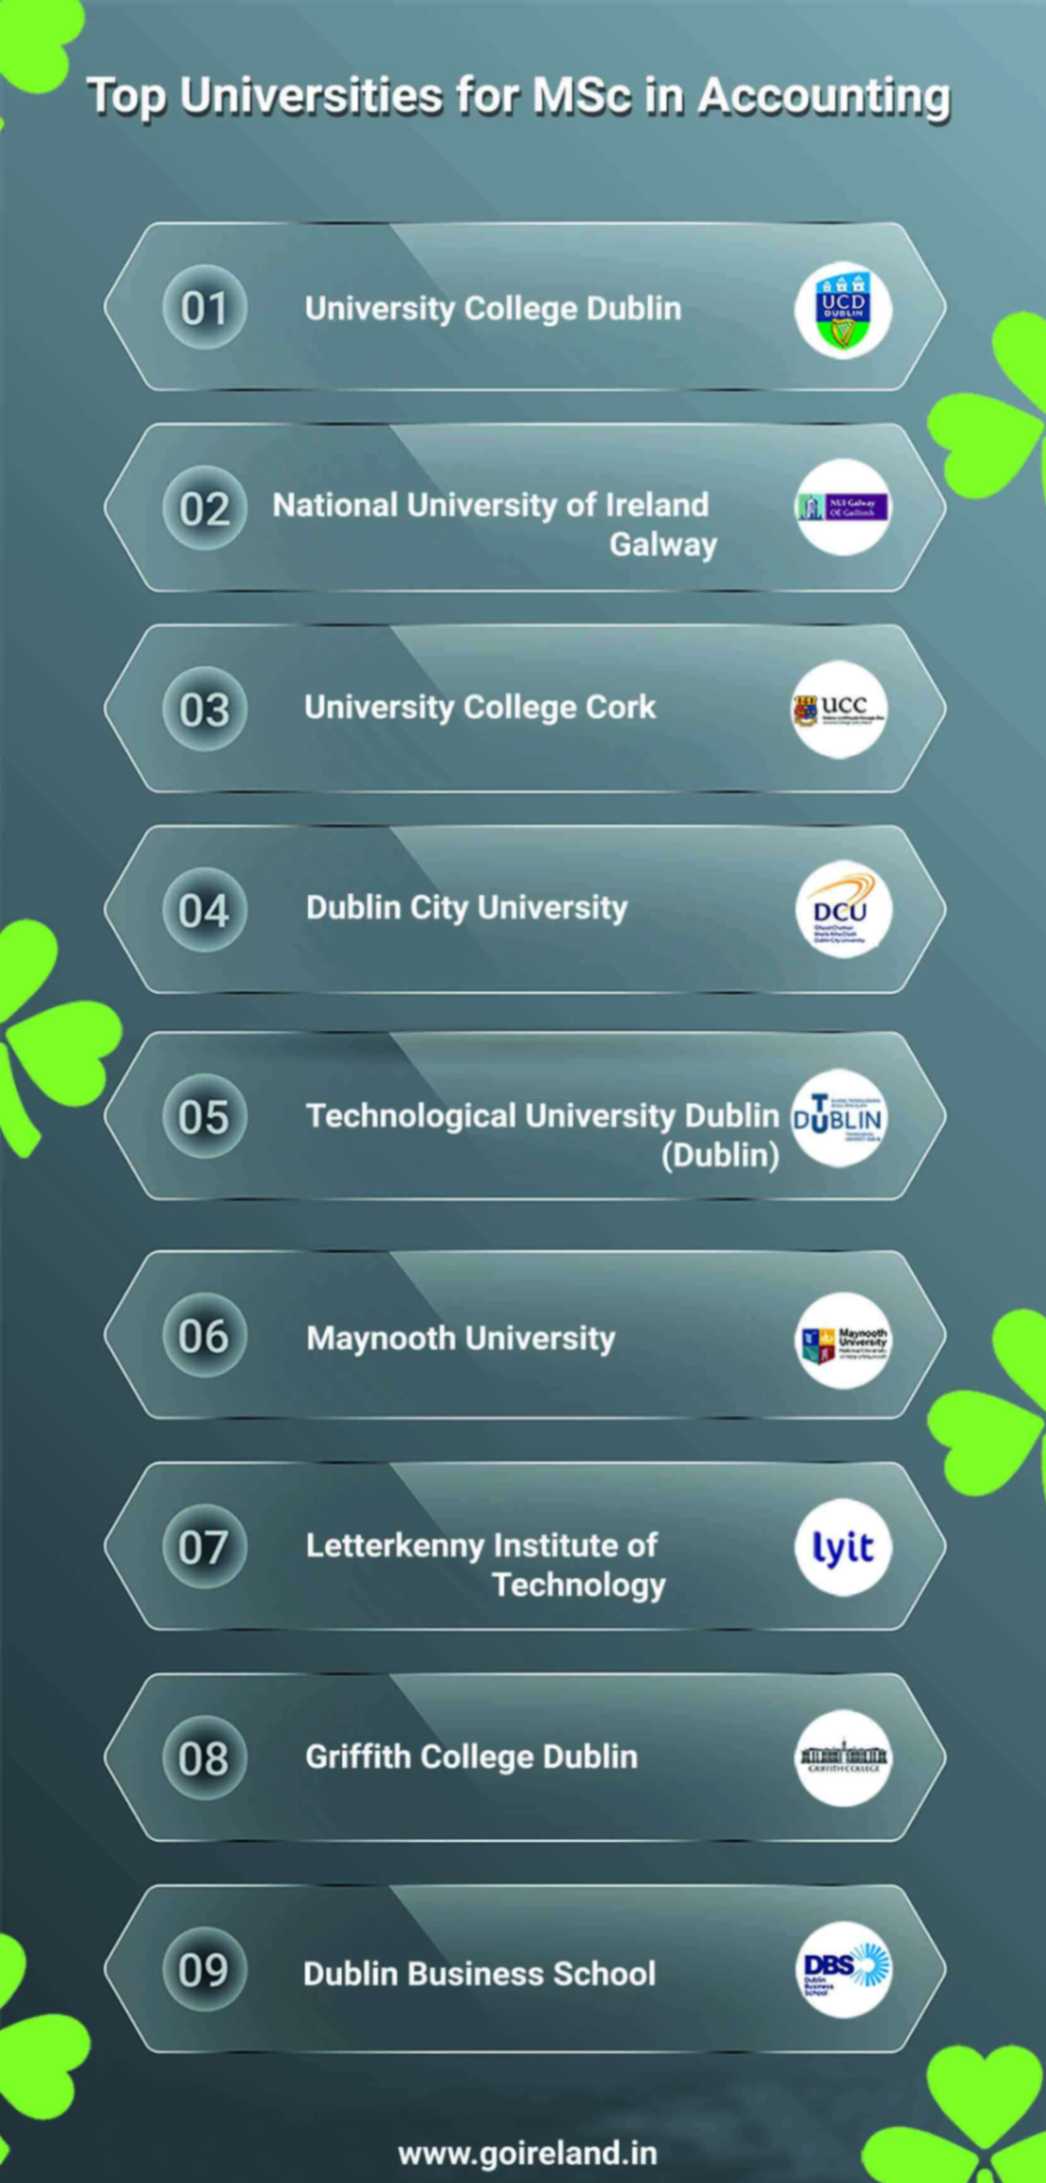 Top Universities for MSc in Accounting